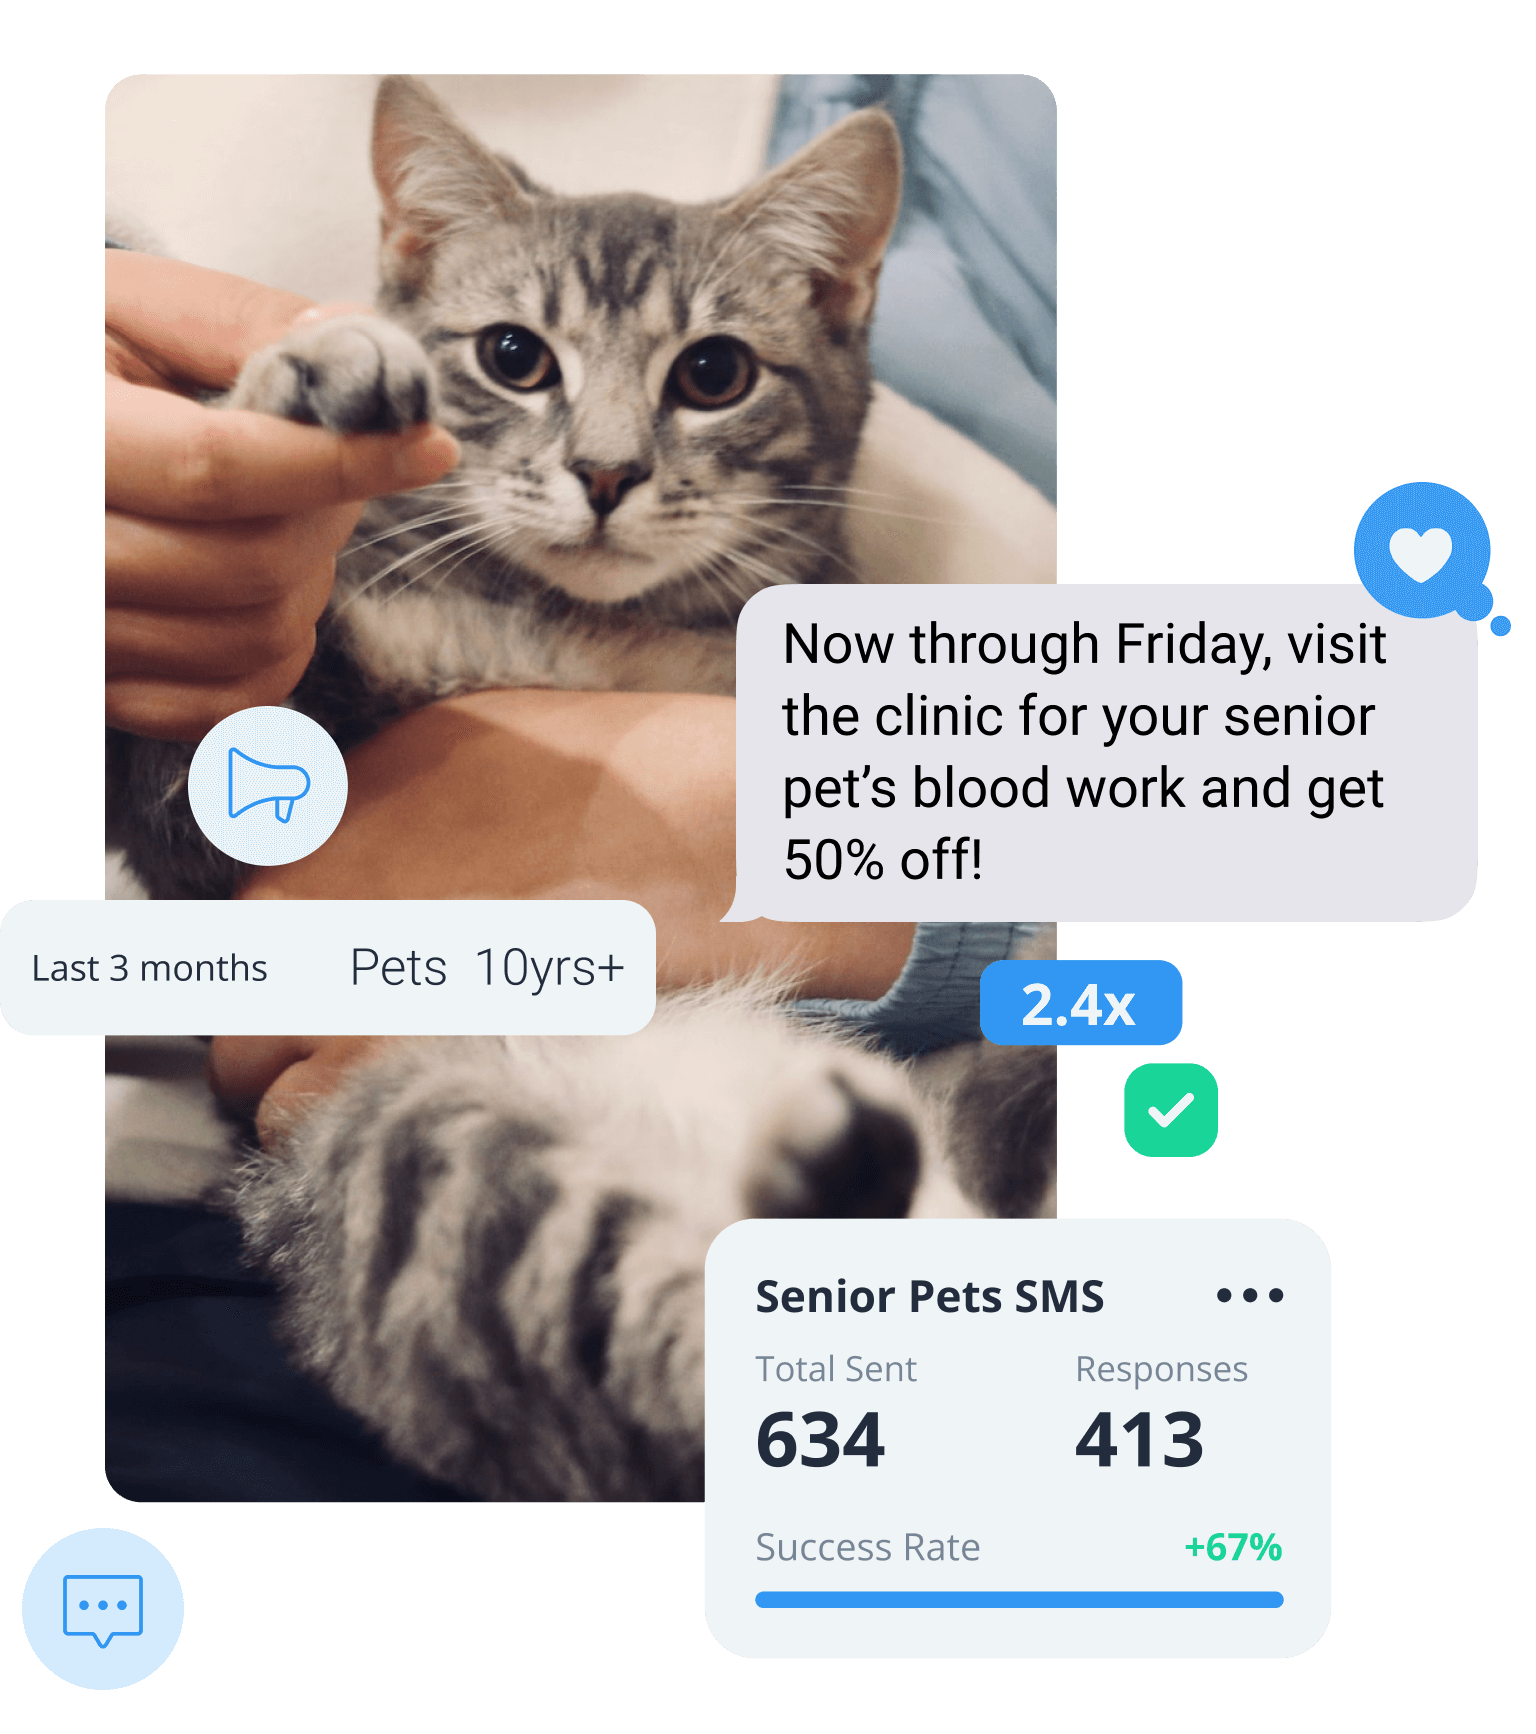 SMS marketing agency campaign for veterinarian clinic